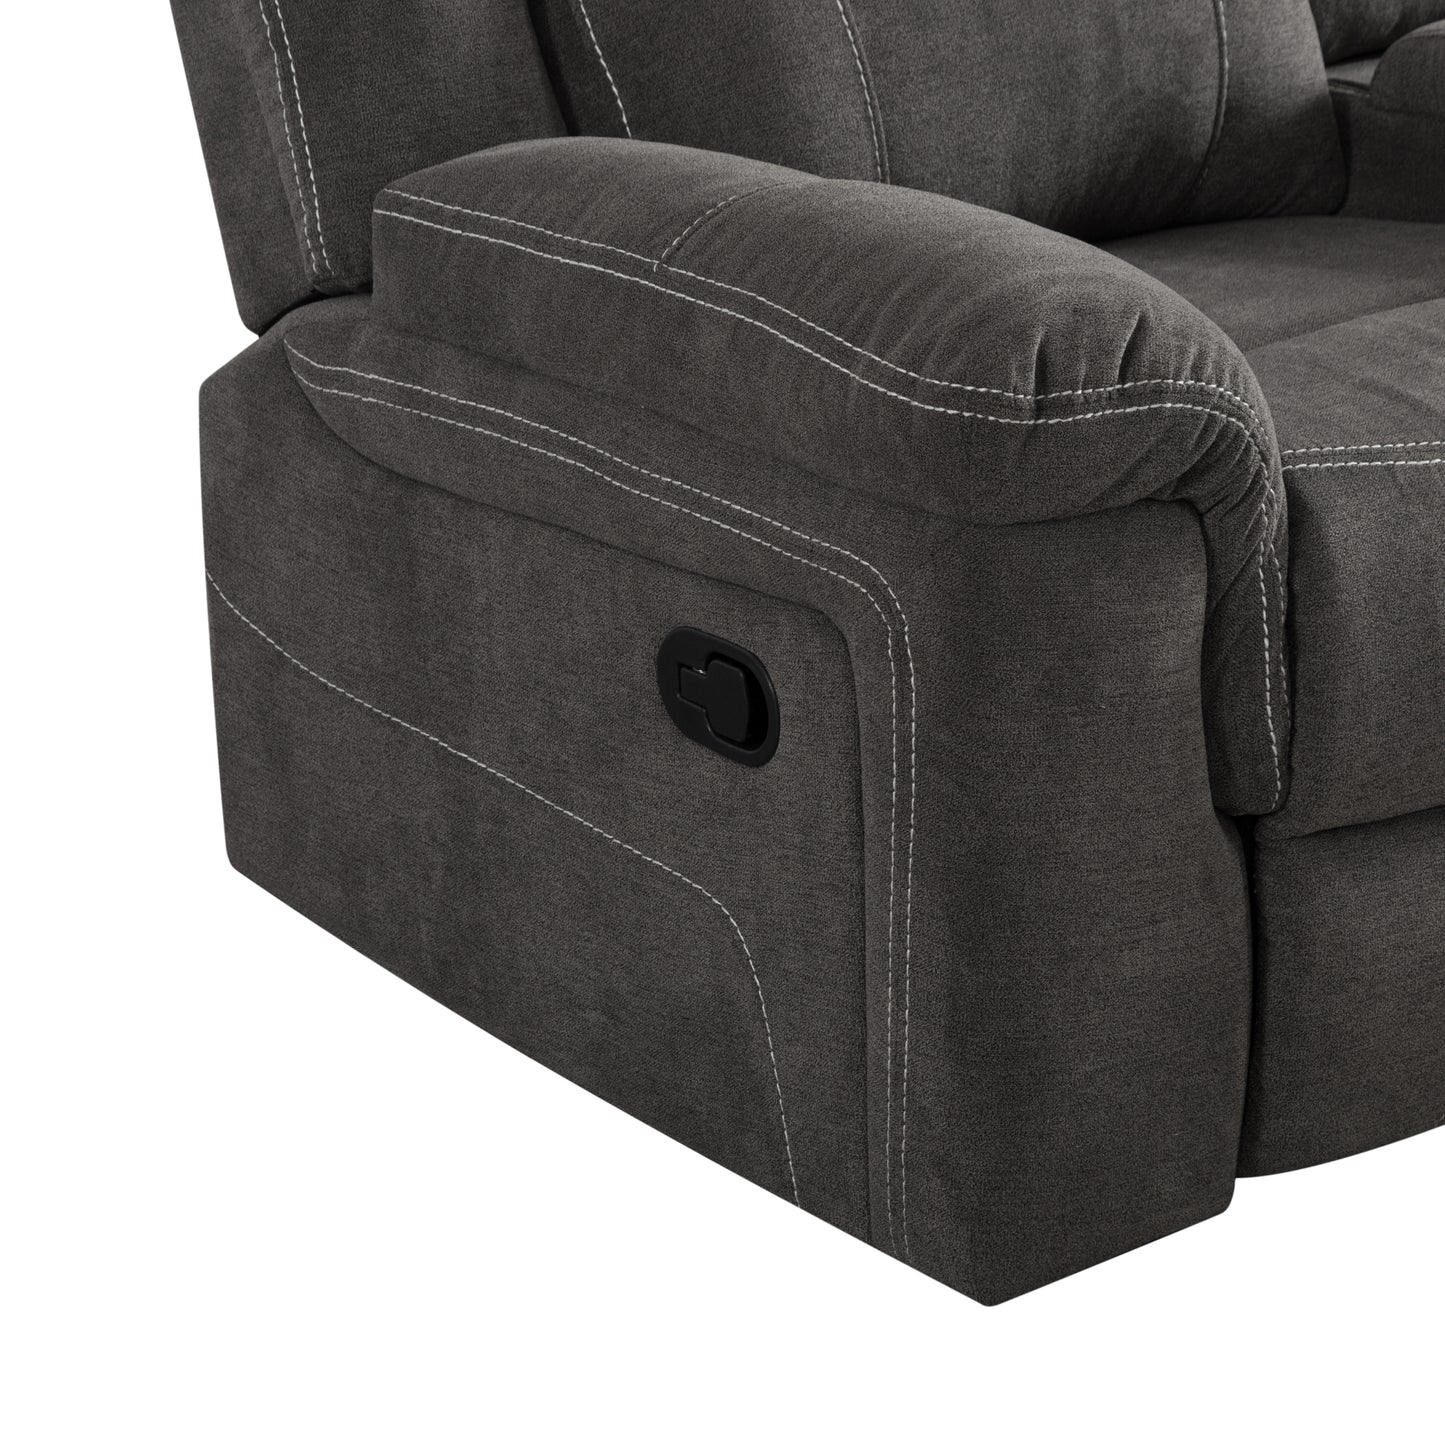 "Comfortable Left Recliner with Adjustable Backrest and Durable Upholstery in Multiple Colors and Sizes"